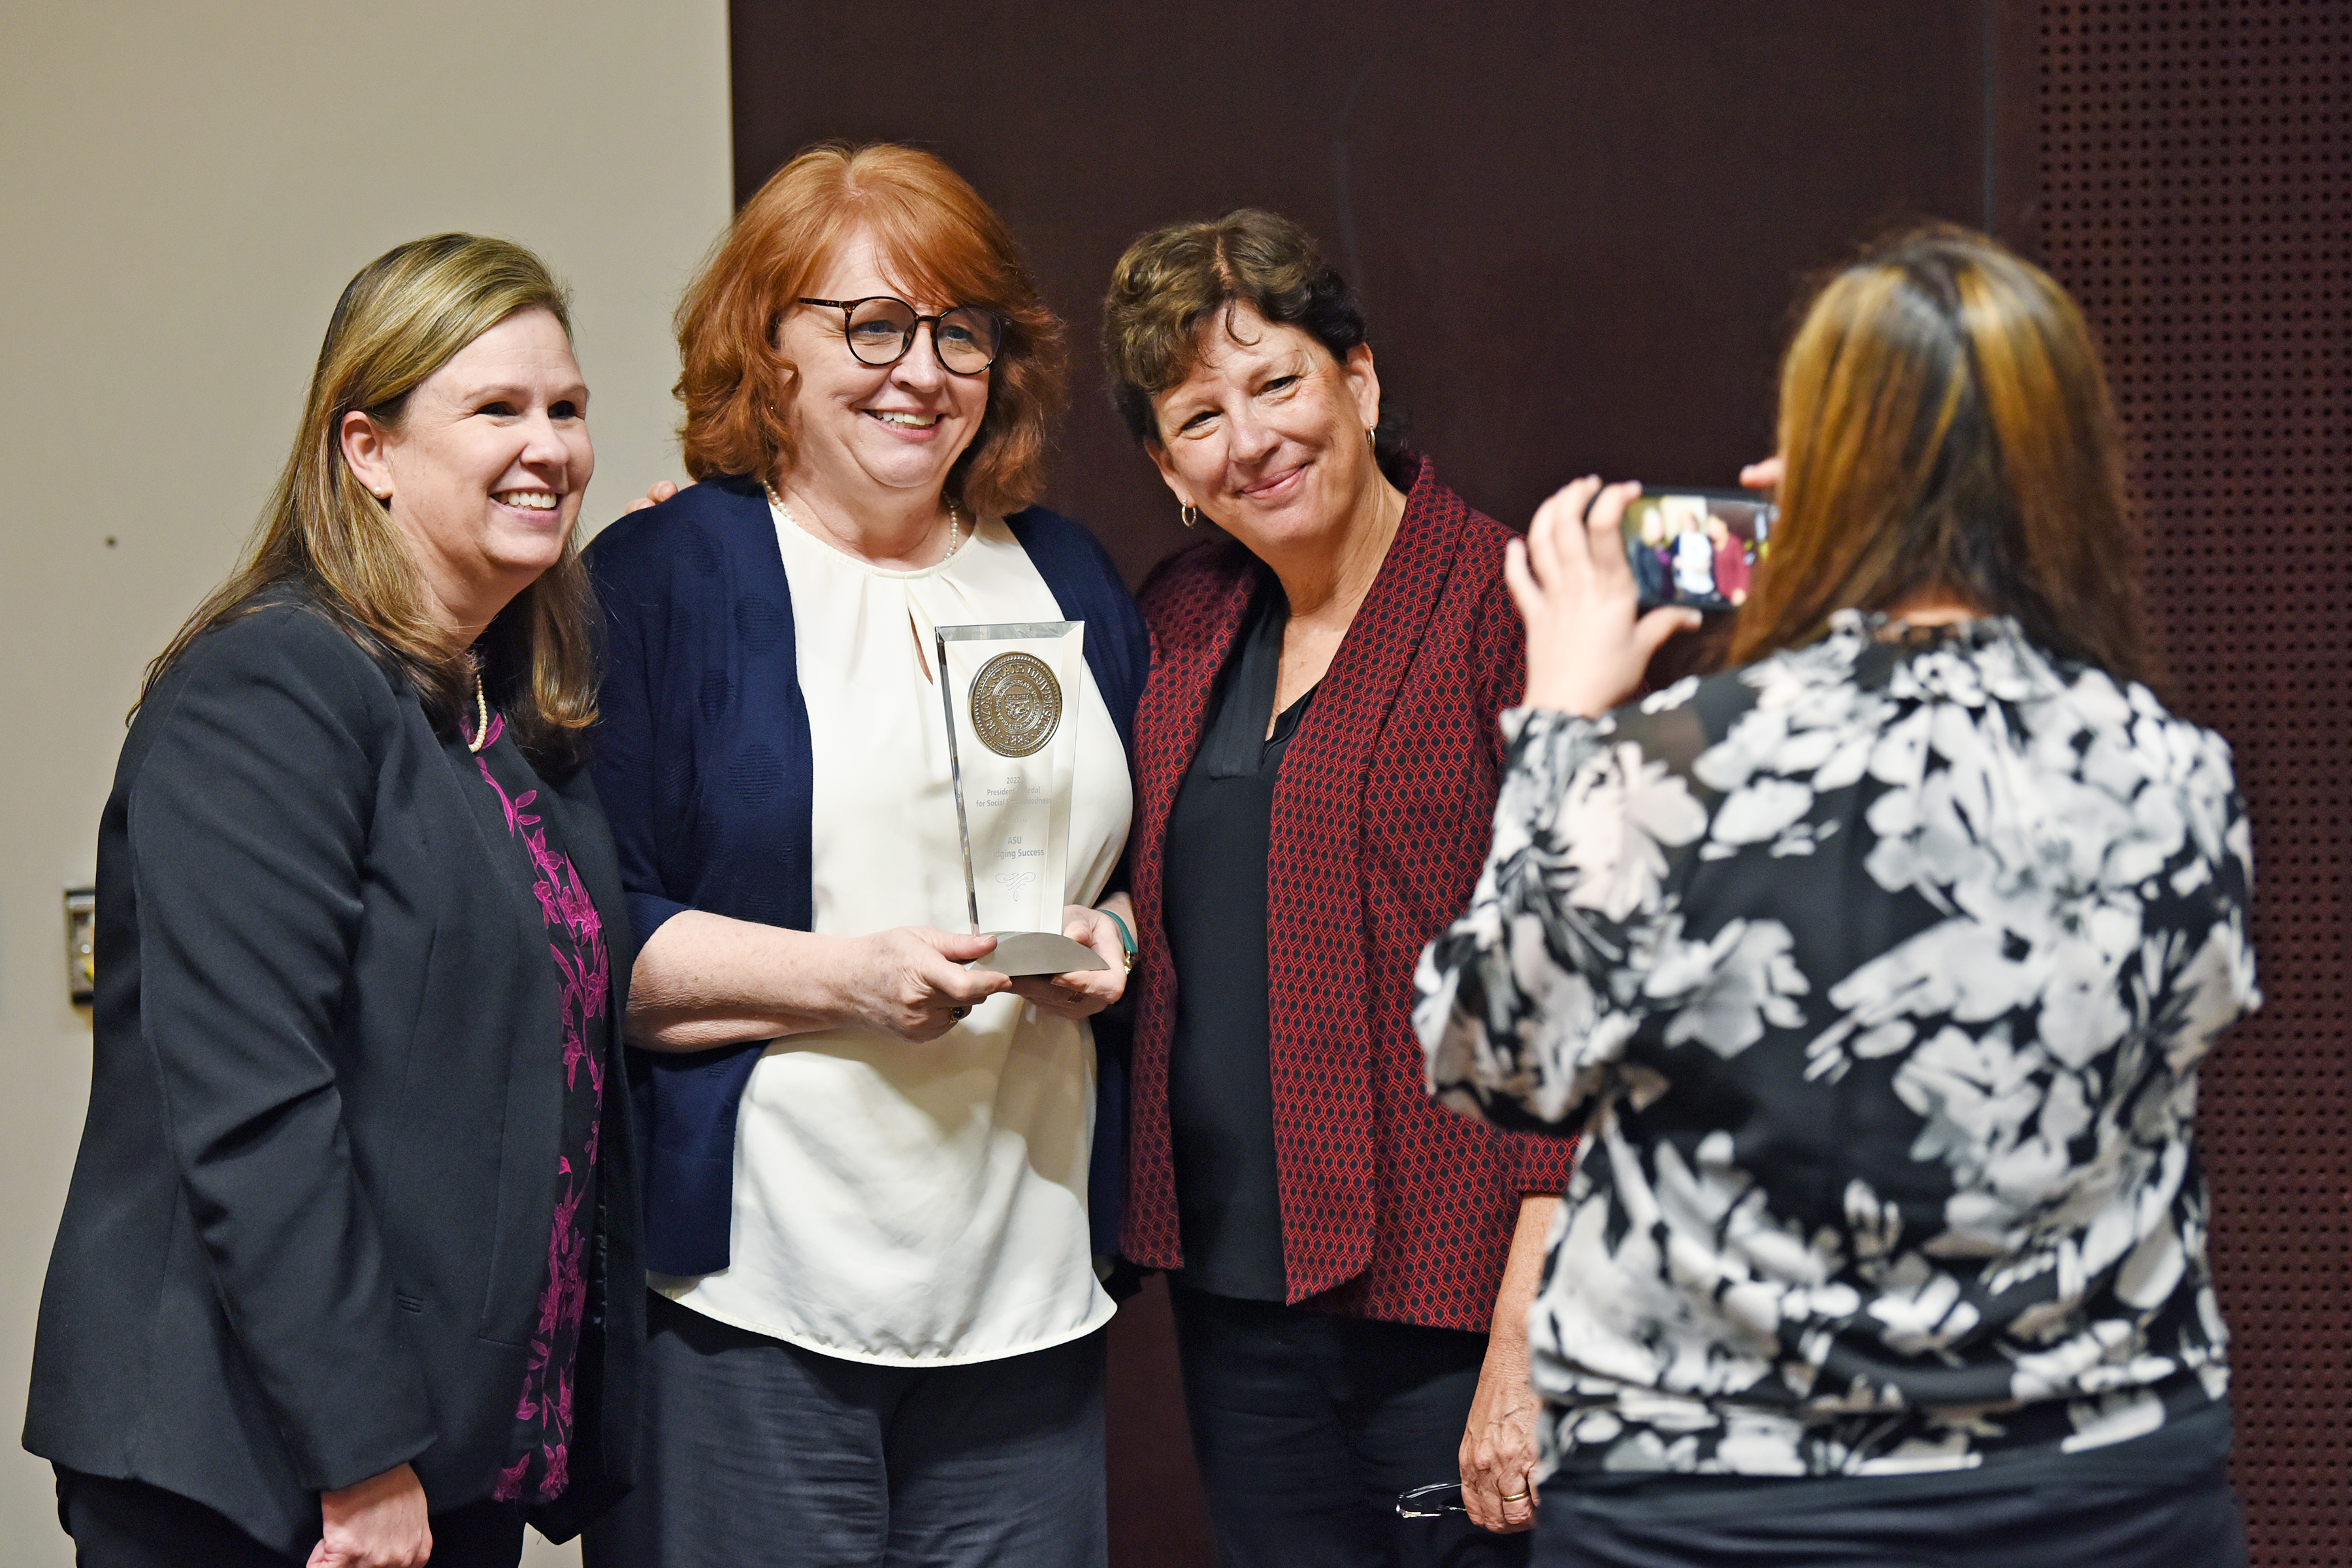 Woman taking picture of group with award